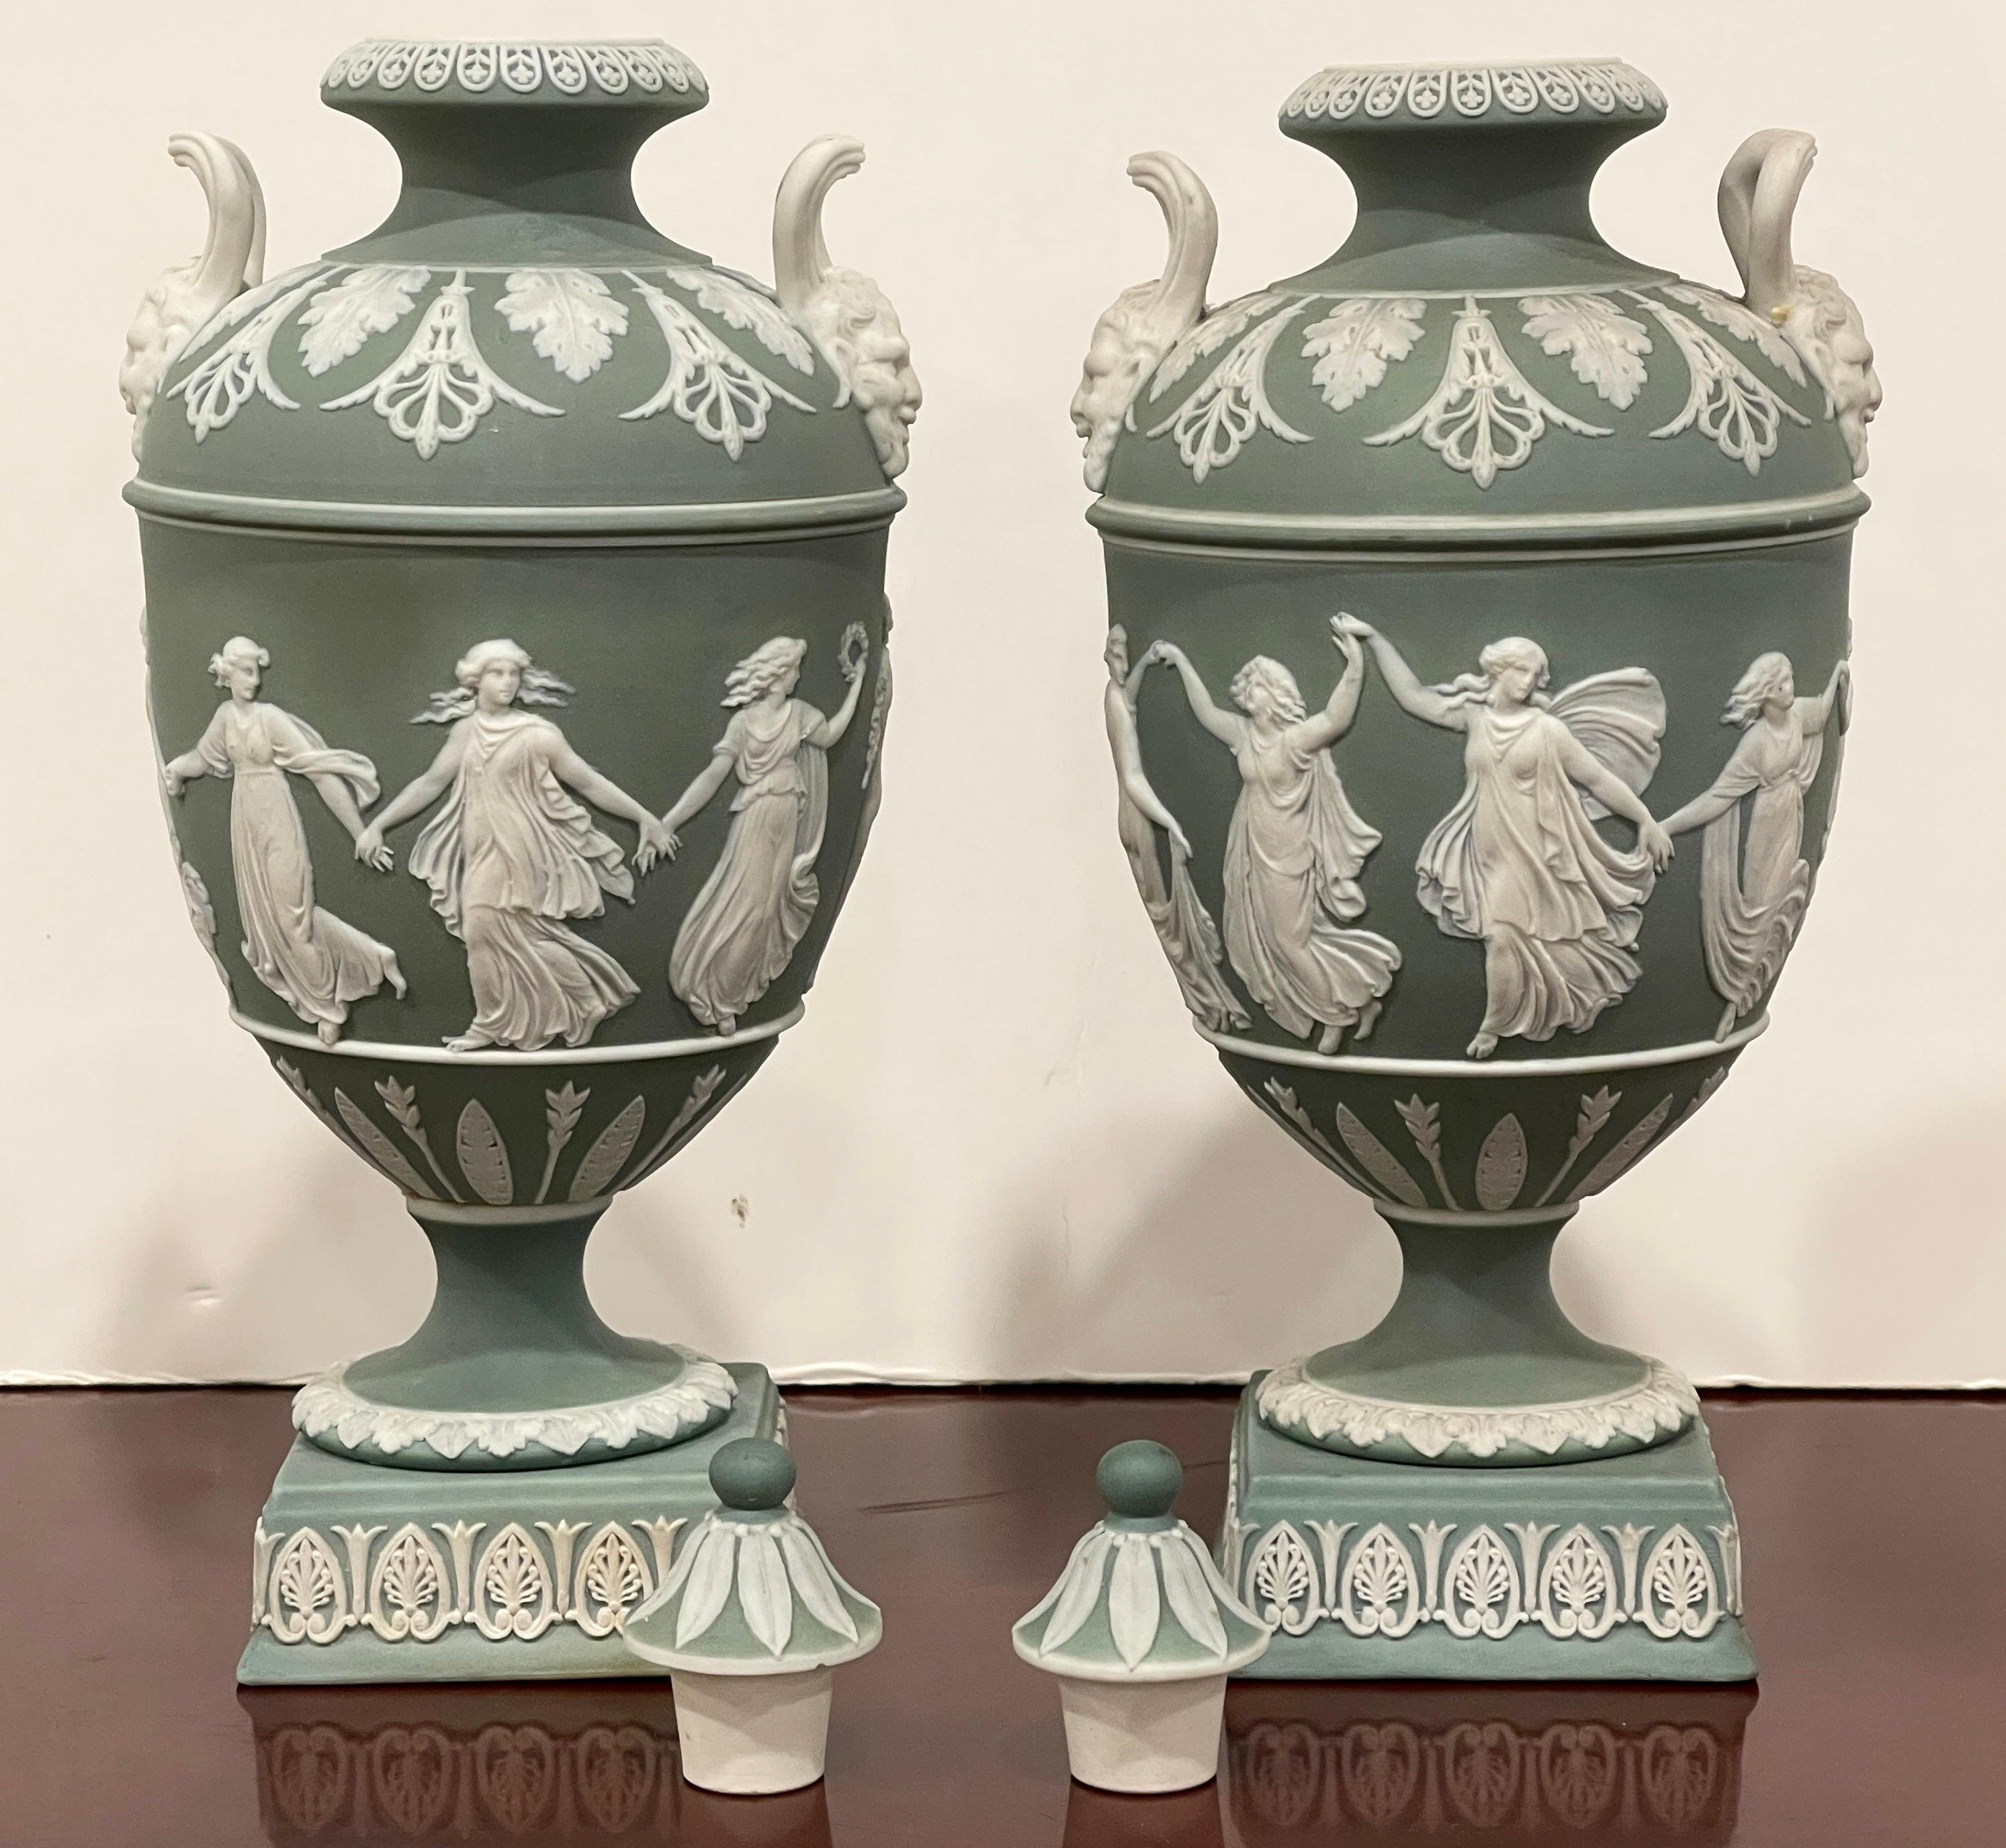 Pair of Wedgwood Olive Basalt ‘Dancing Hours ‘ Vases with Covers 1